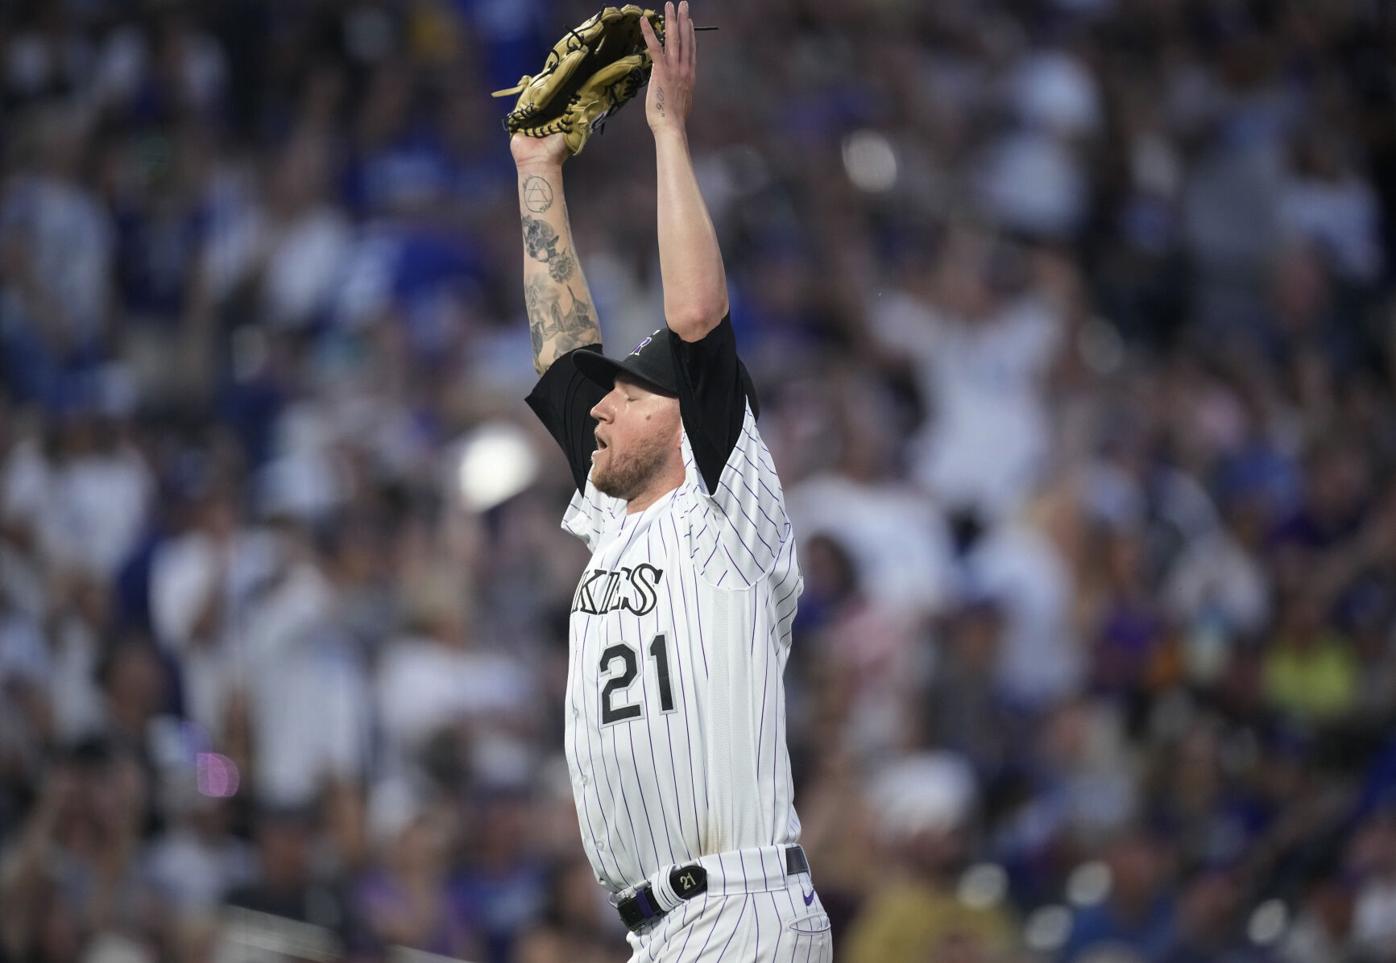 Kyle Freeland leads Rockies to another win over the Padres